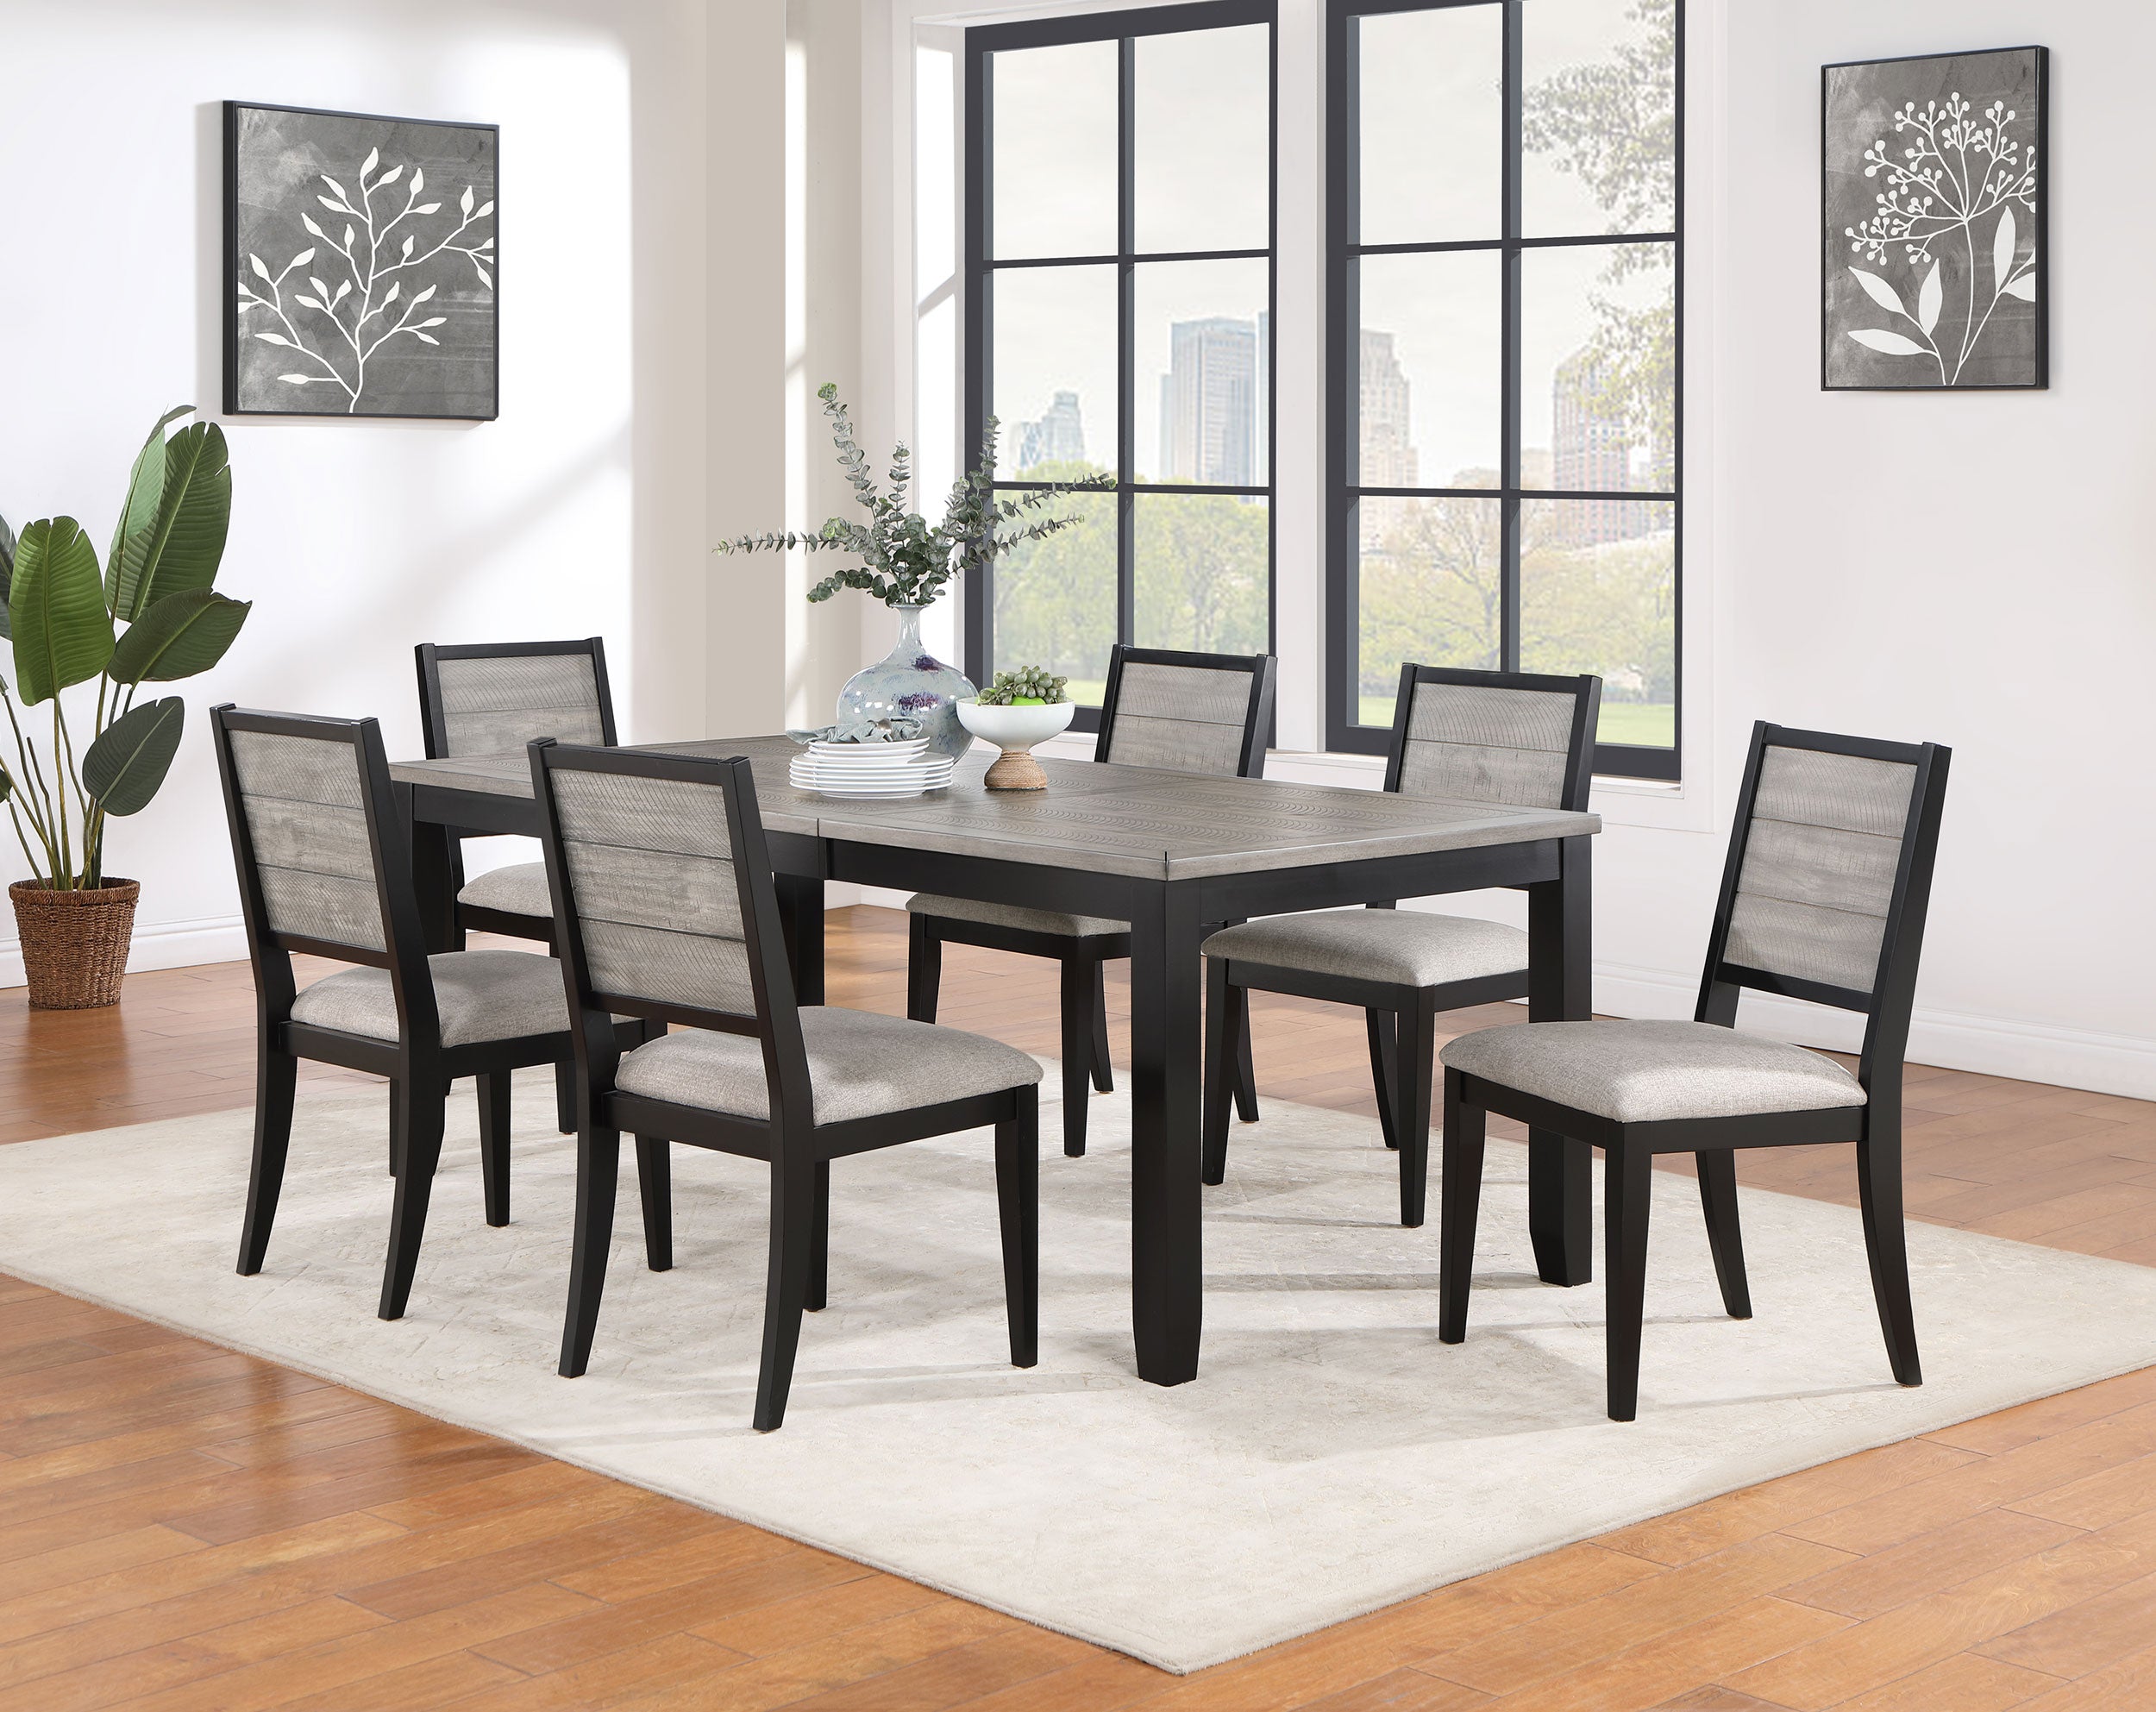 Elodie 7-piece Dining Table Set with Extension Leaf in Grey and Black